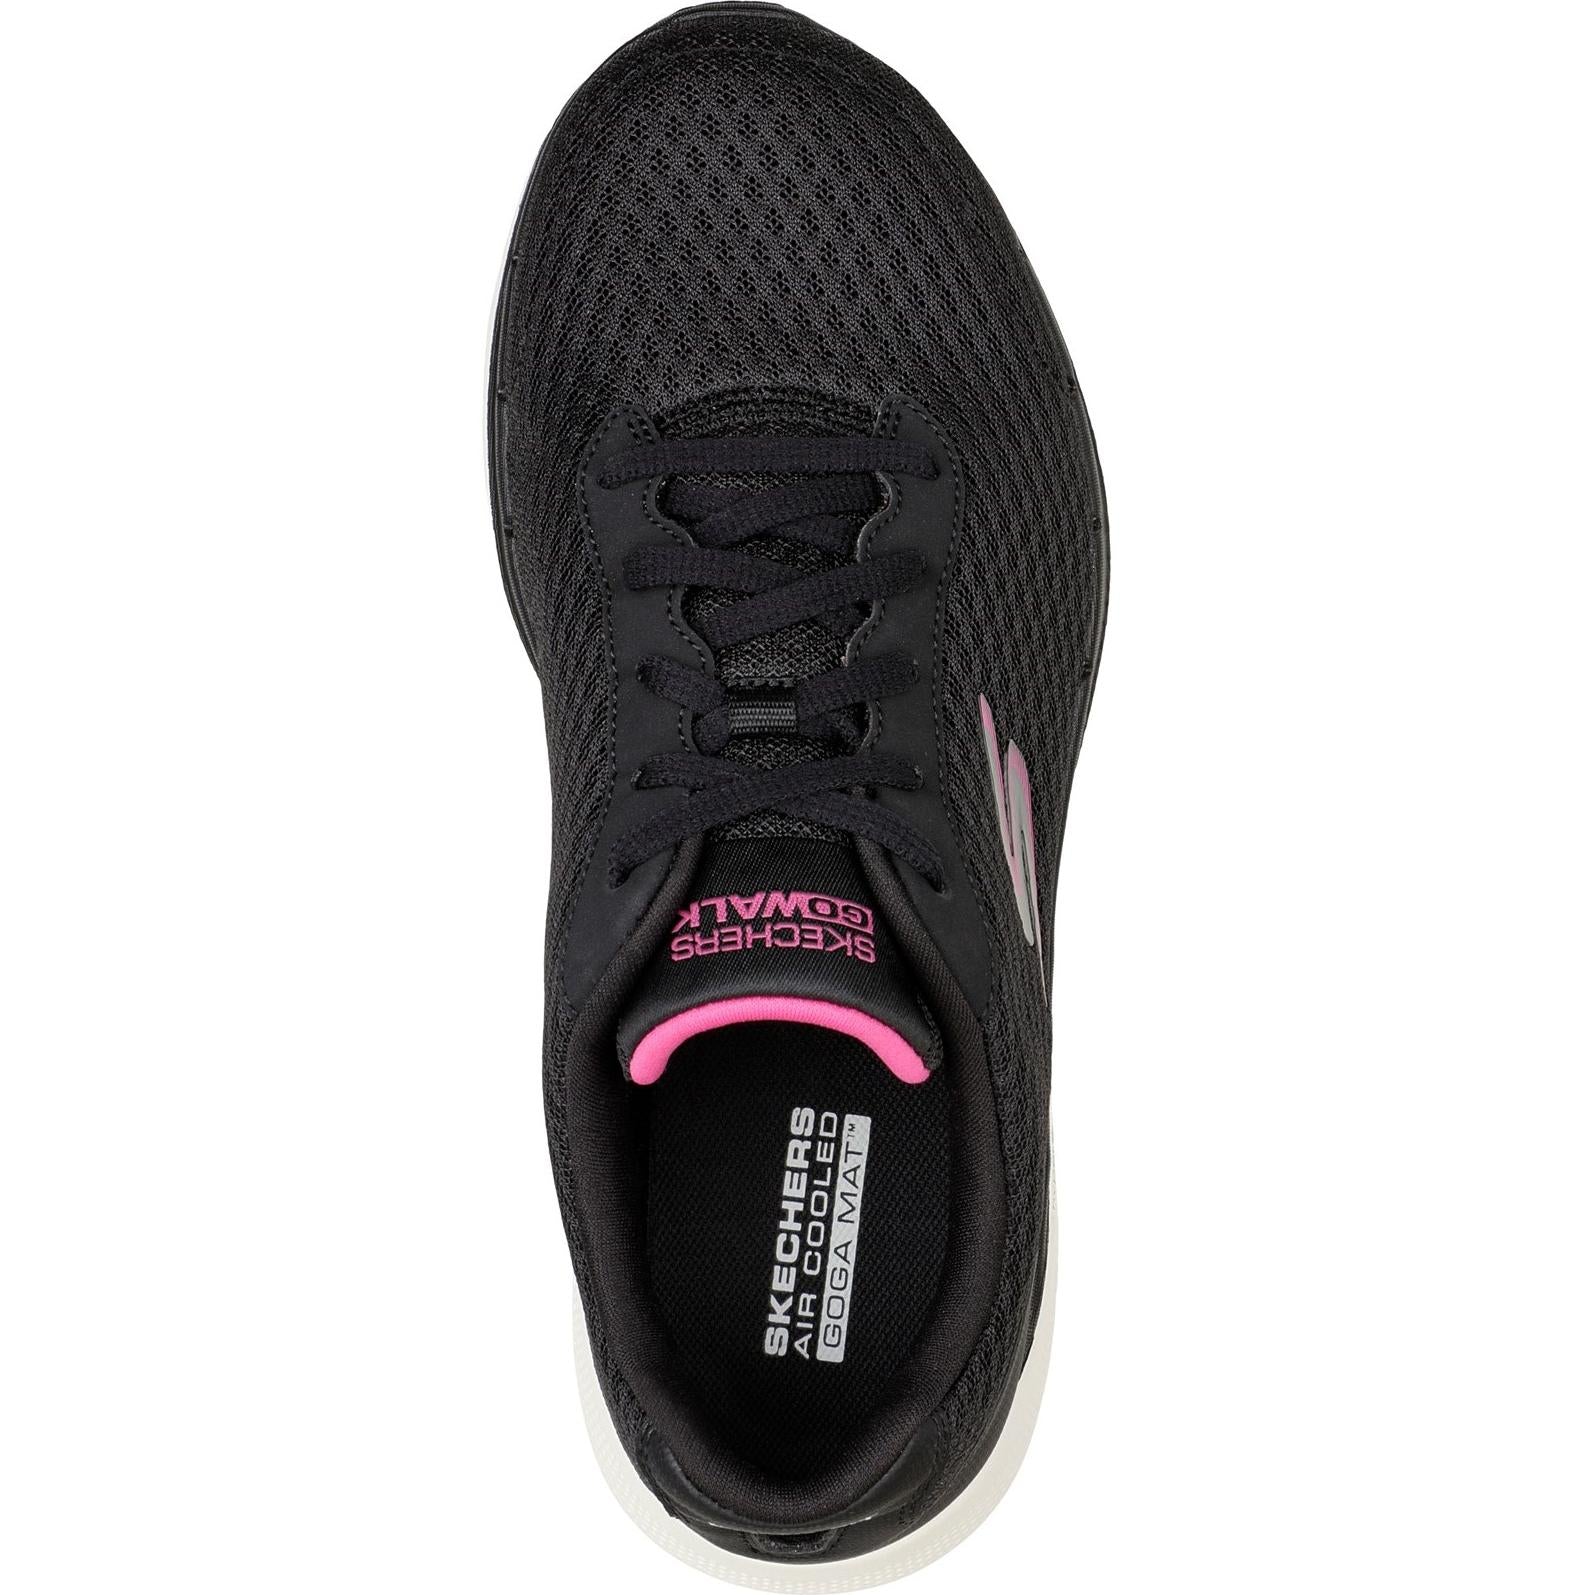 Skechers Go Walk 6 Iconic Vision Trainers